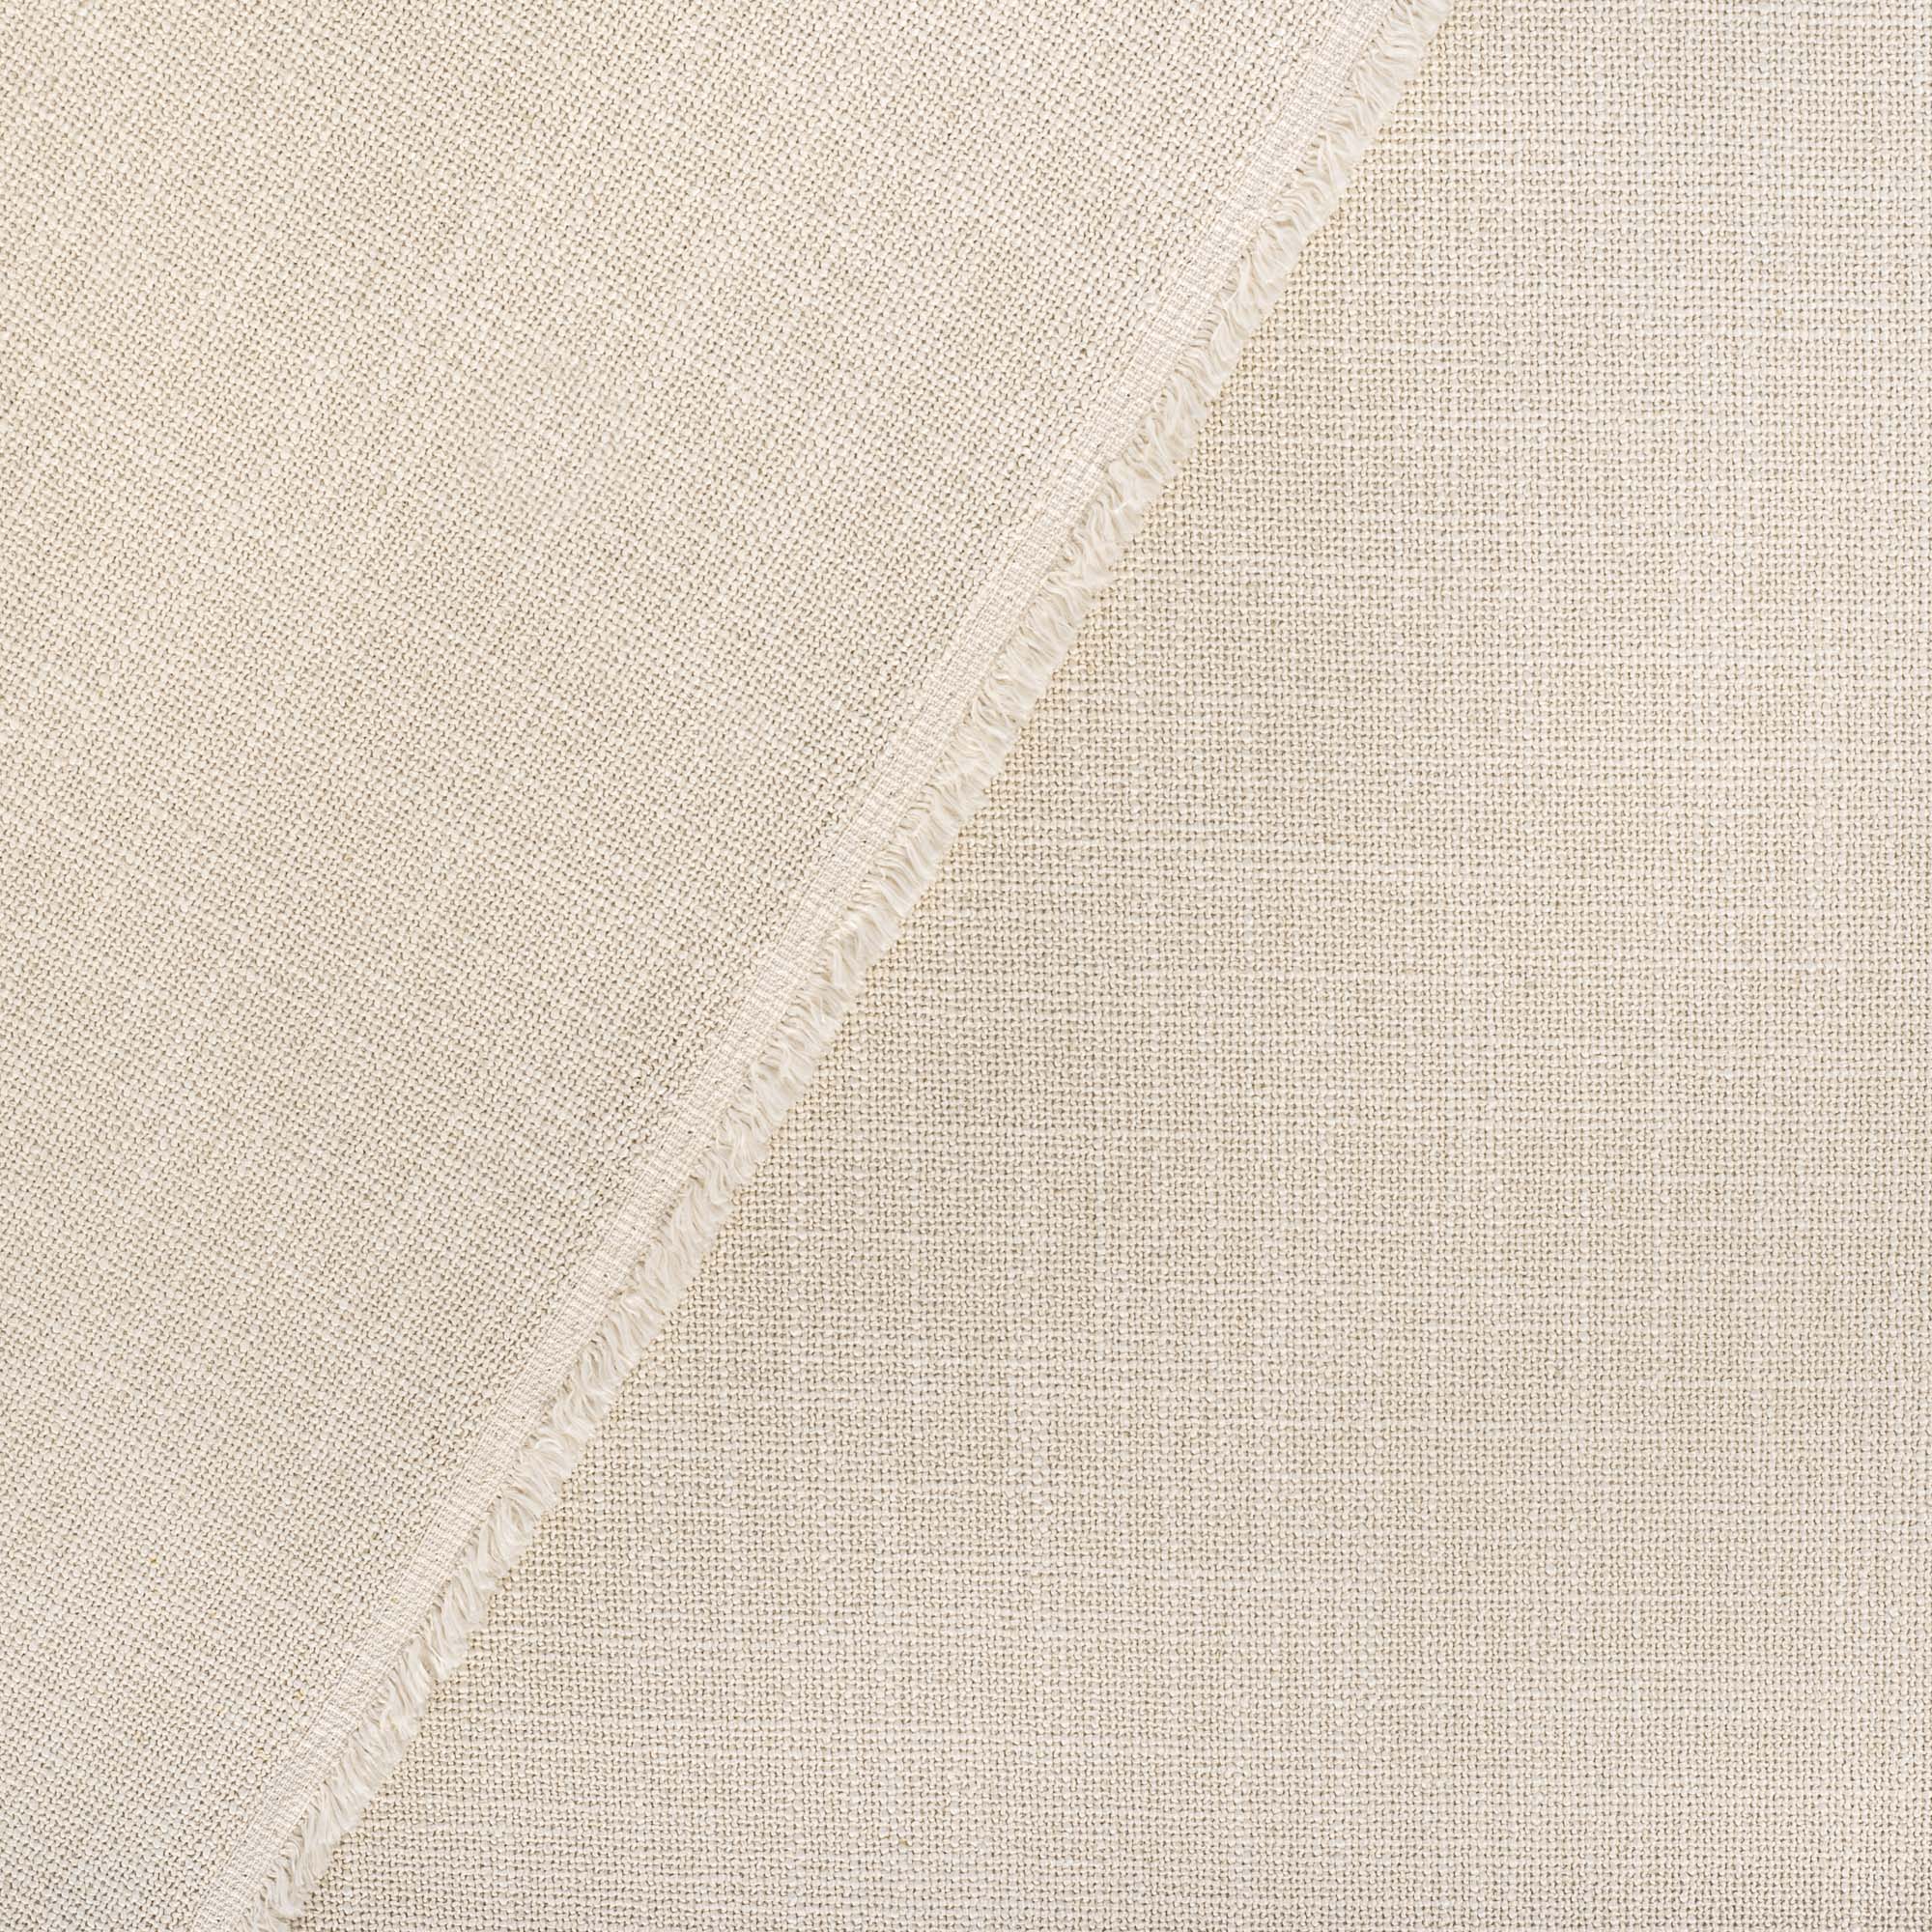 Grange Fabric Parchment, a high performance sandy beige upholstery fabric : close up view 2